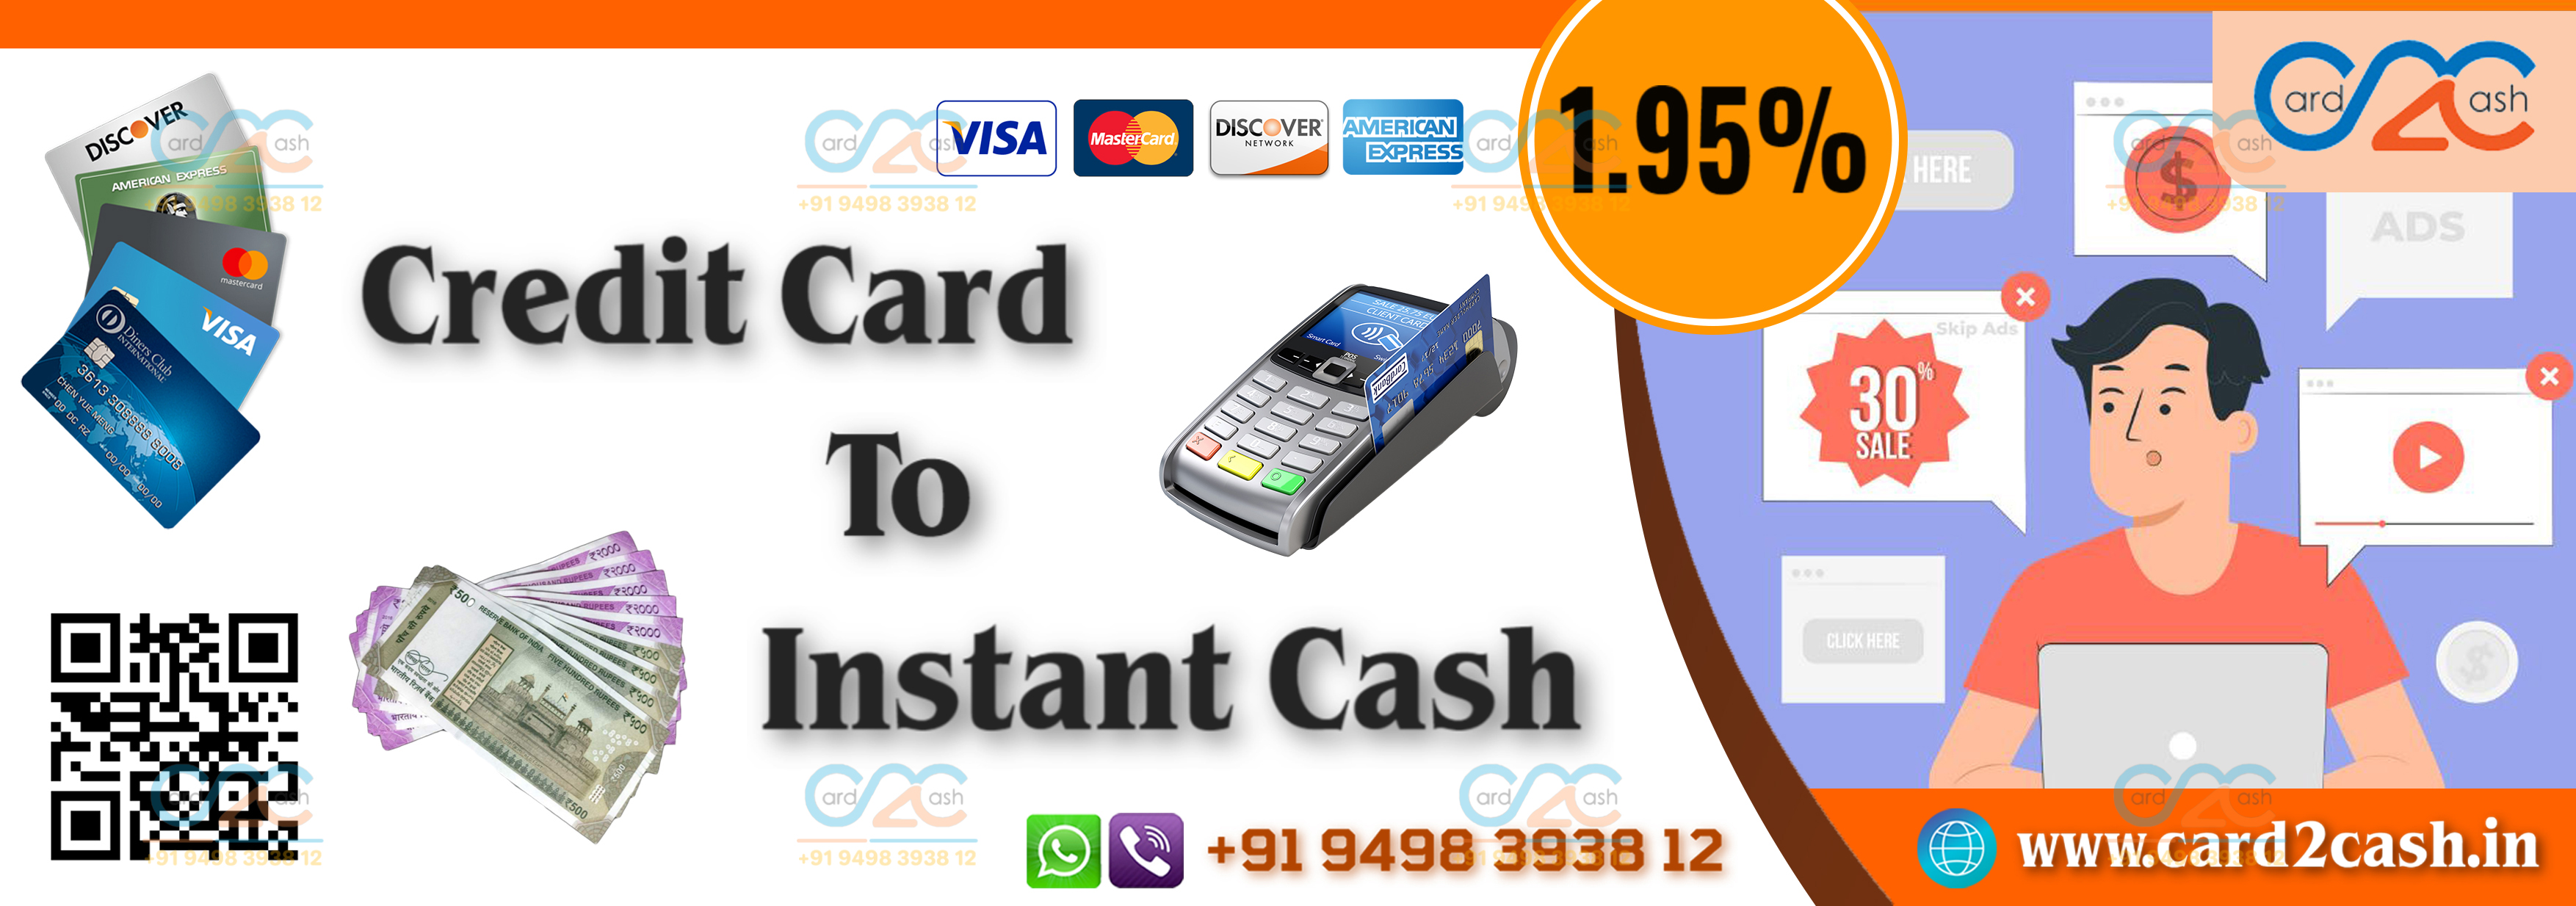 Credit Card to Cash